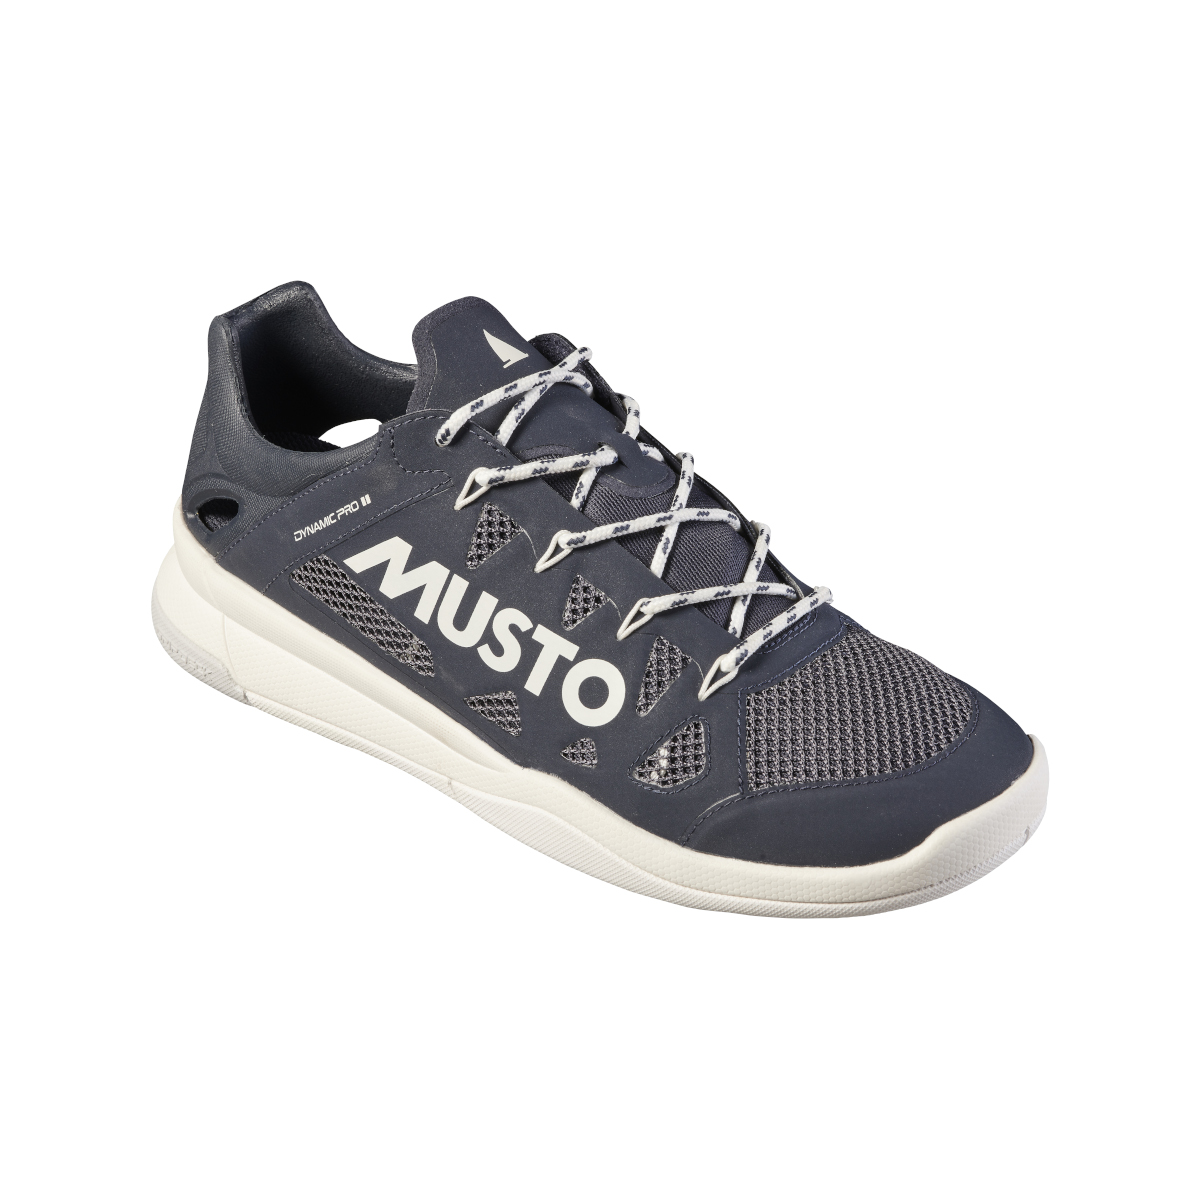 Musto Dynamic Pro II chaussures de voile homme bleu marine, taille 41